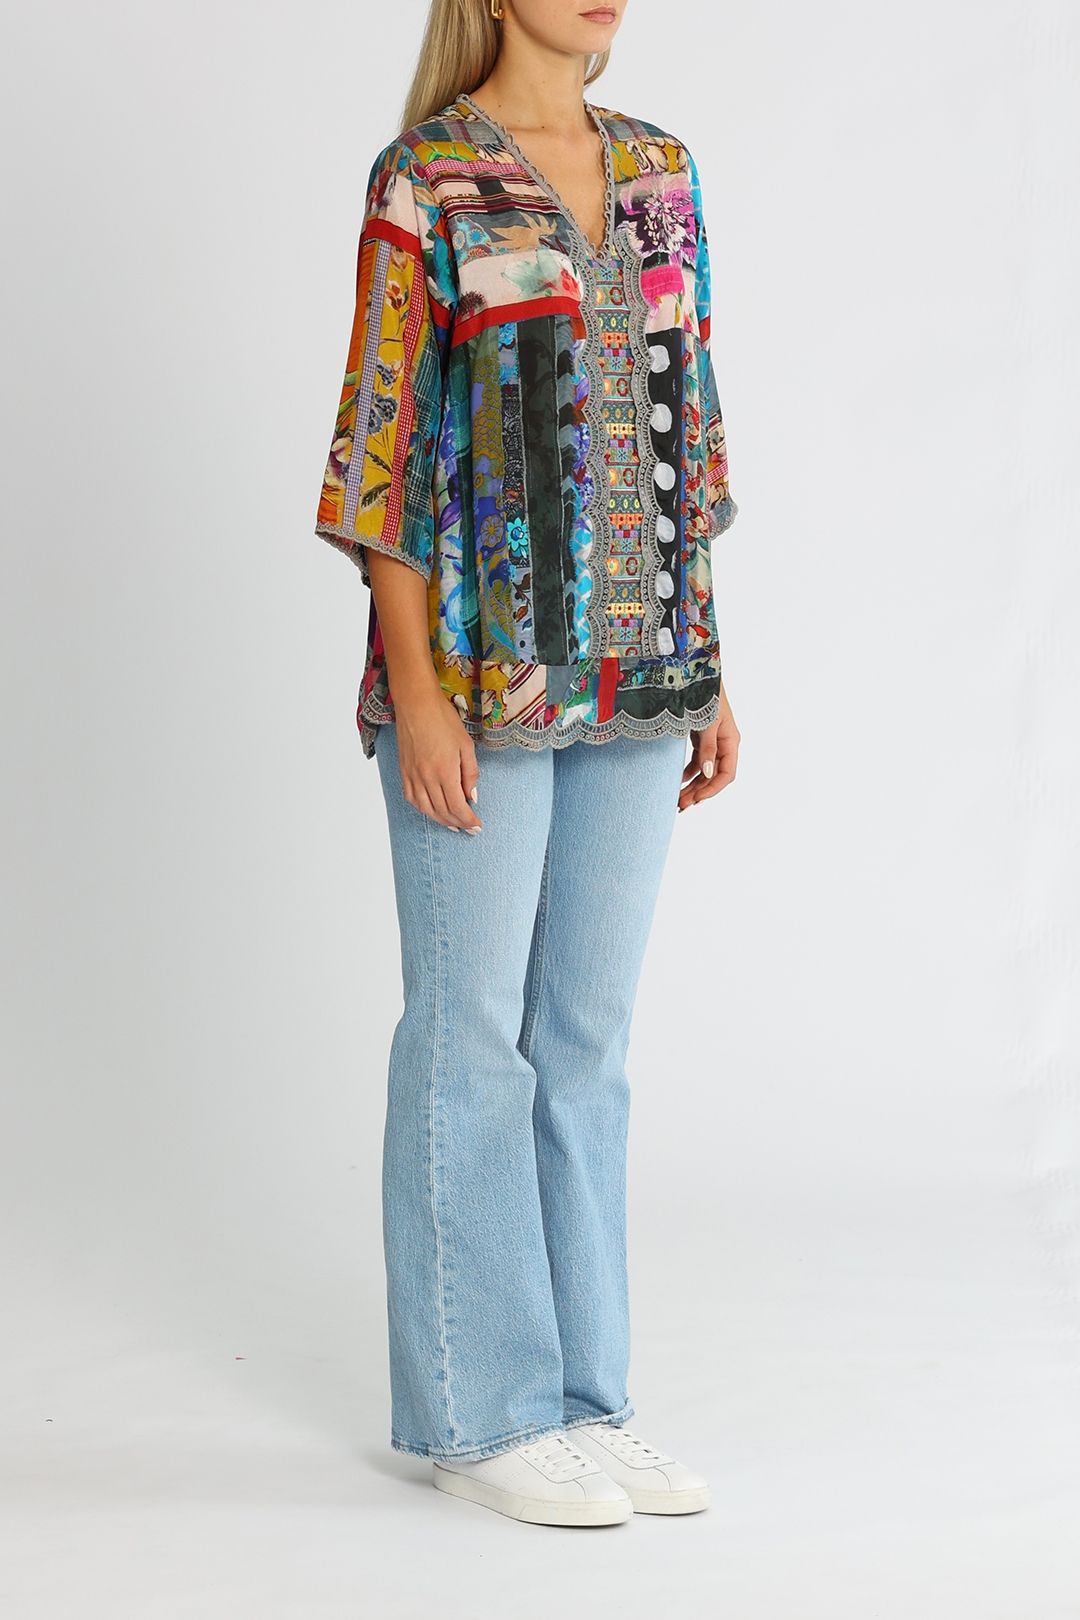 Johnny Was Sonnet Leonora Tunic Multi Flared Sleeves